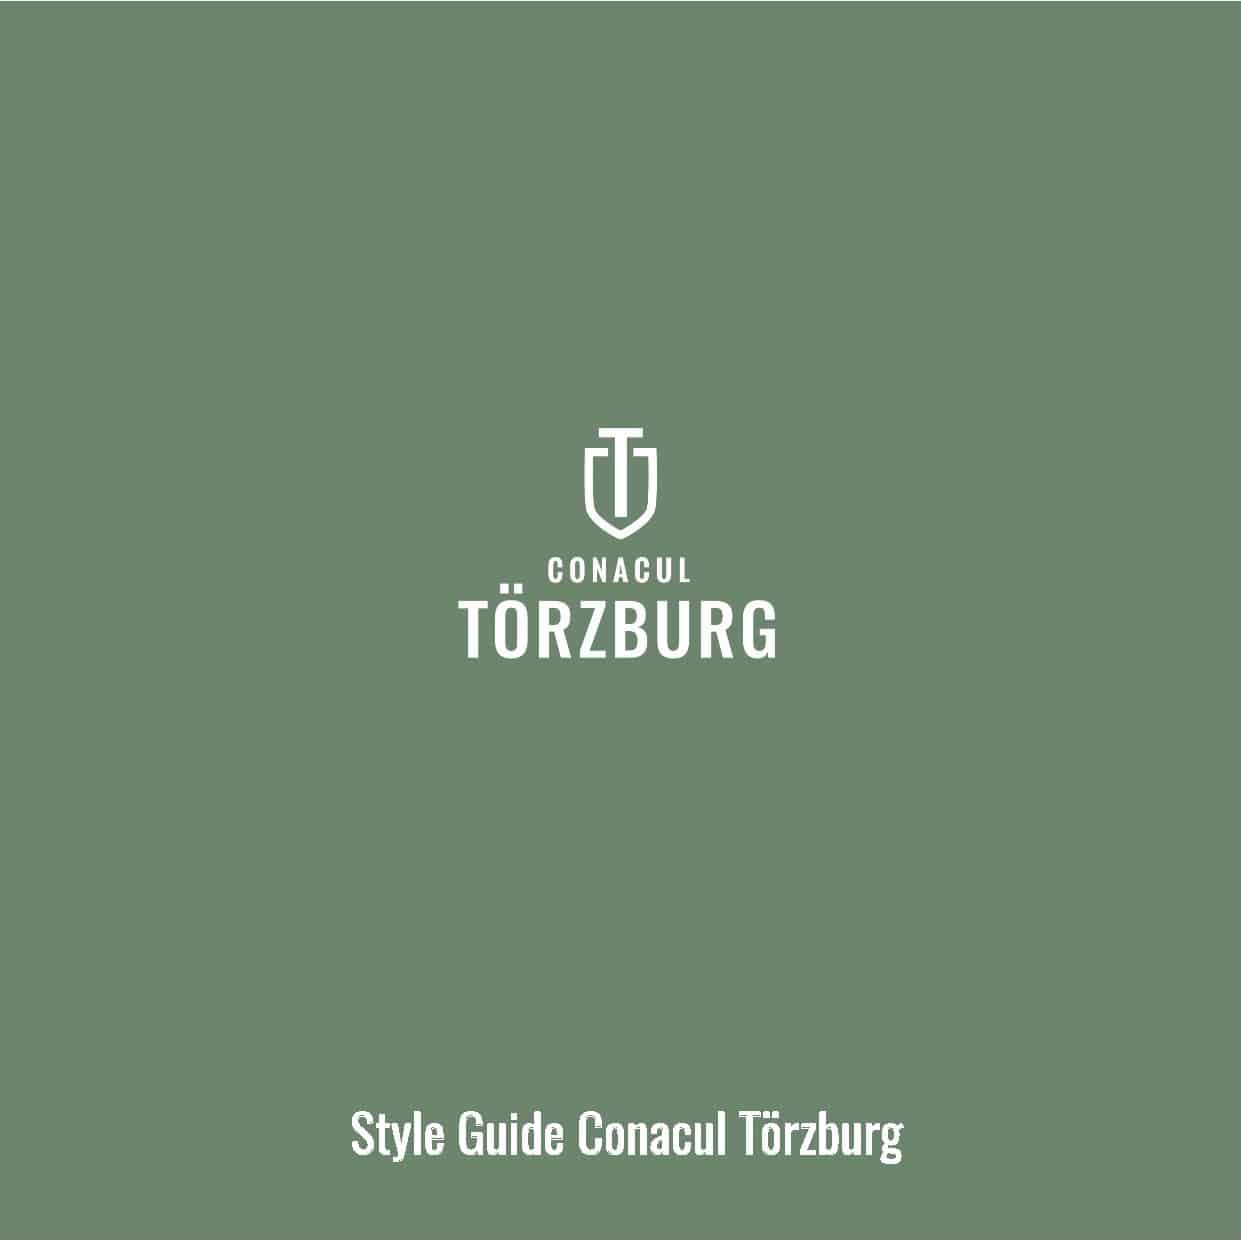 Style Guide Boutique Hotel Bran Torzburg